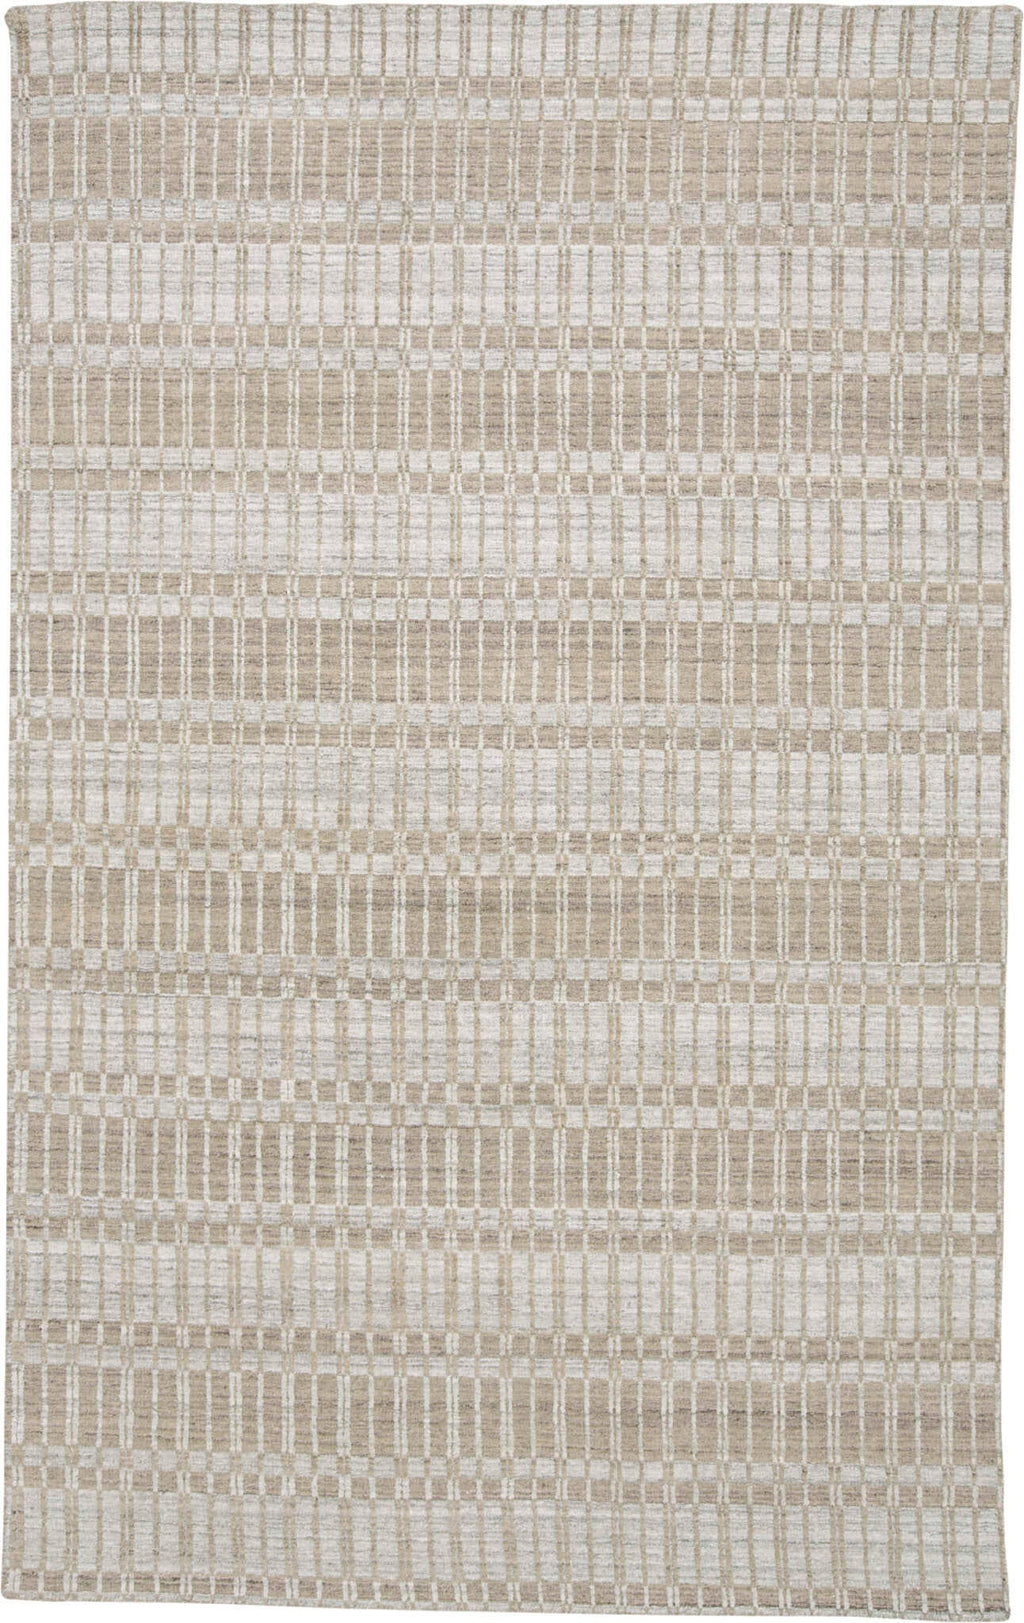 ODELL Collection Wool & Viscose Rug in Tan / Silver